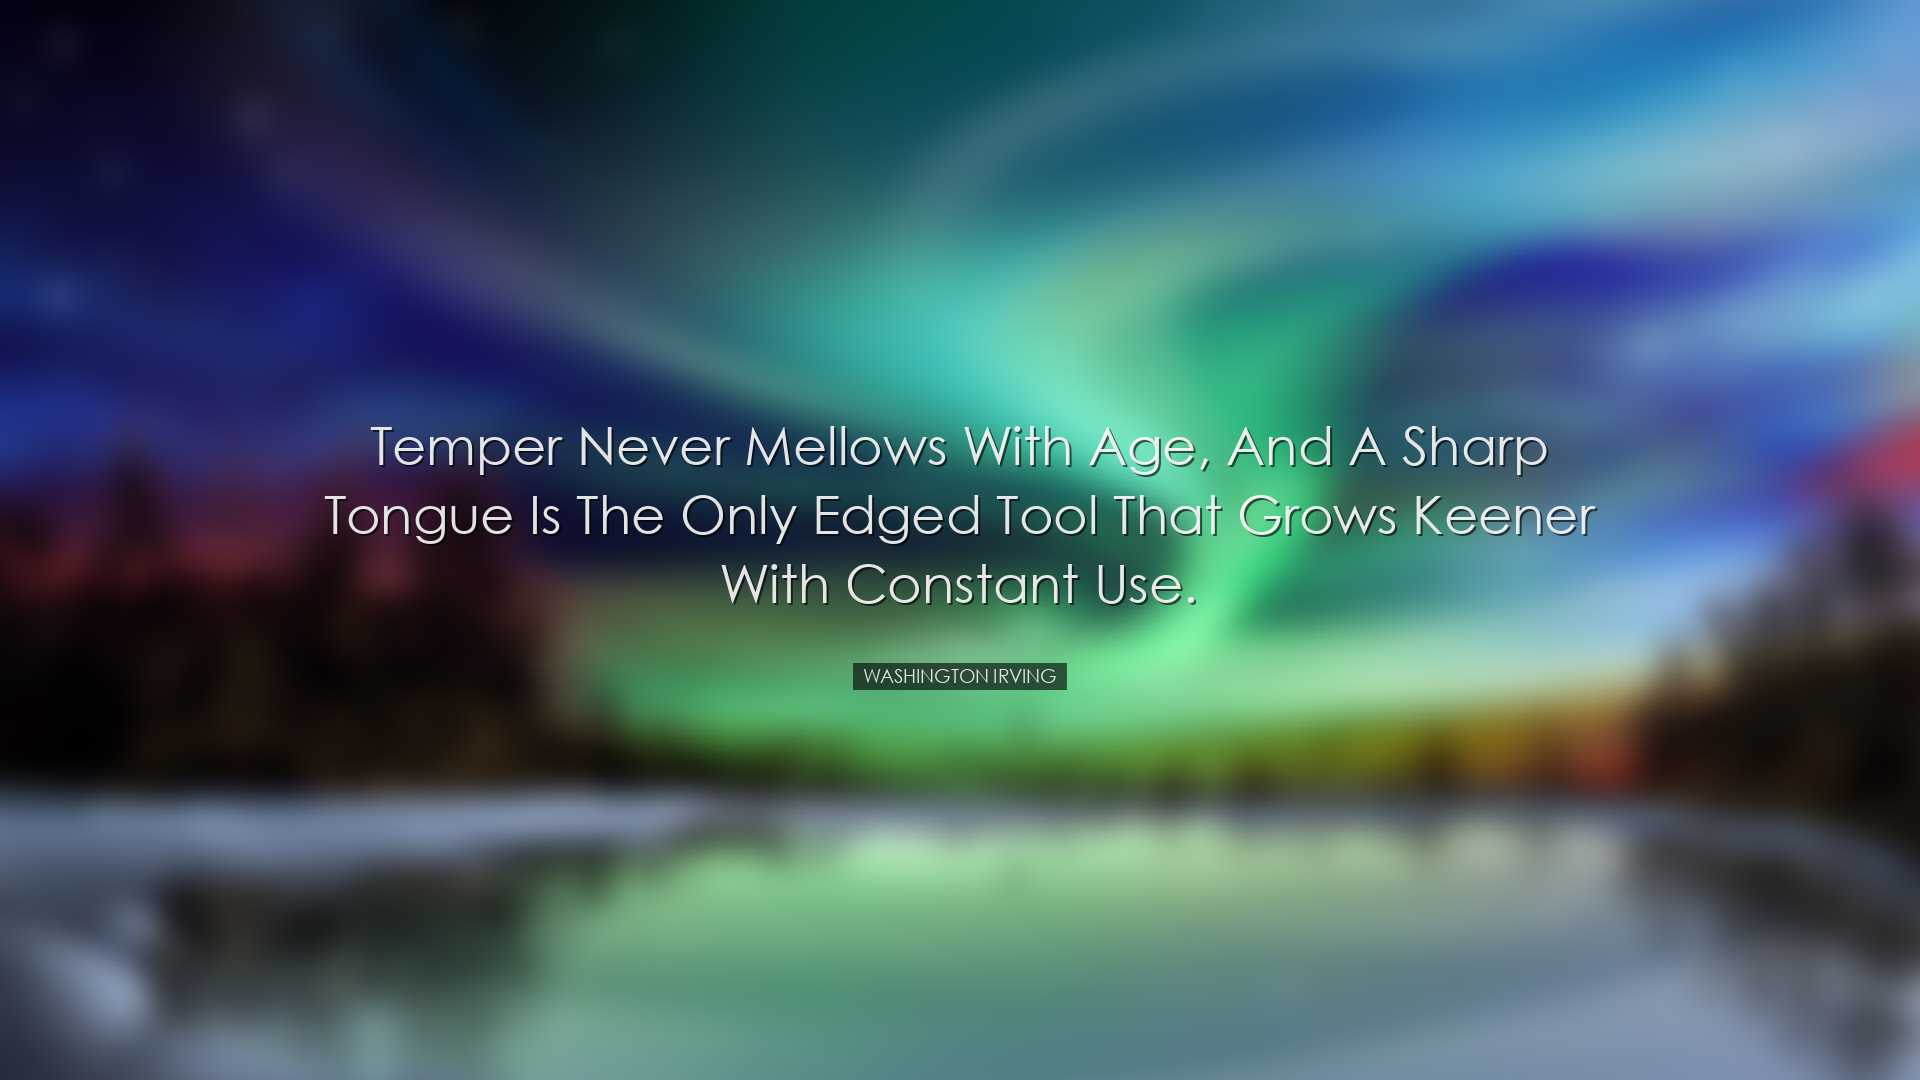 Temper never mellows with age, and a sharp tongue is the only edge